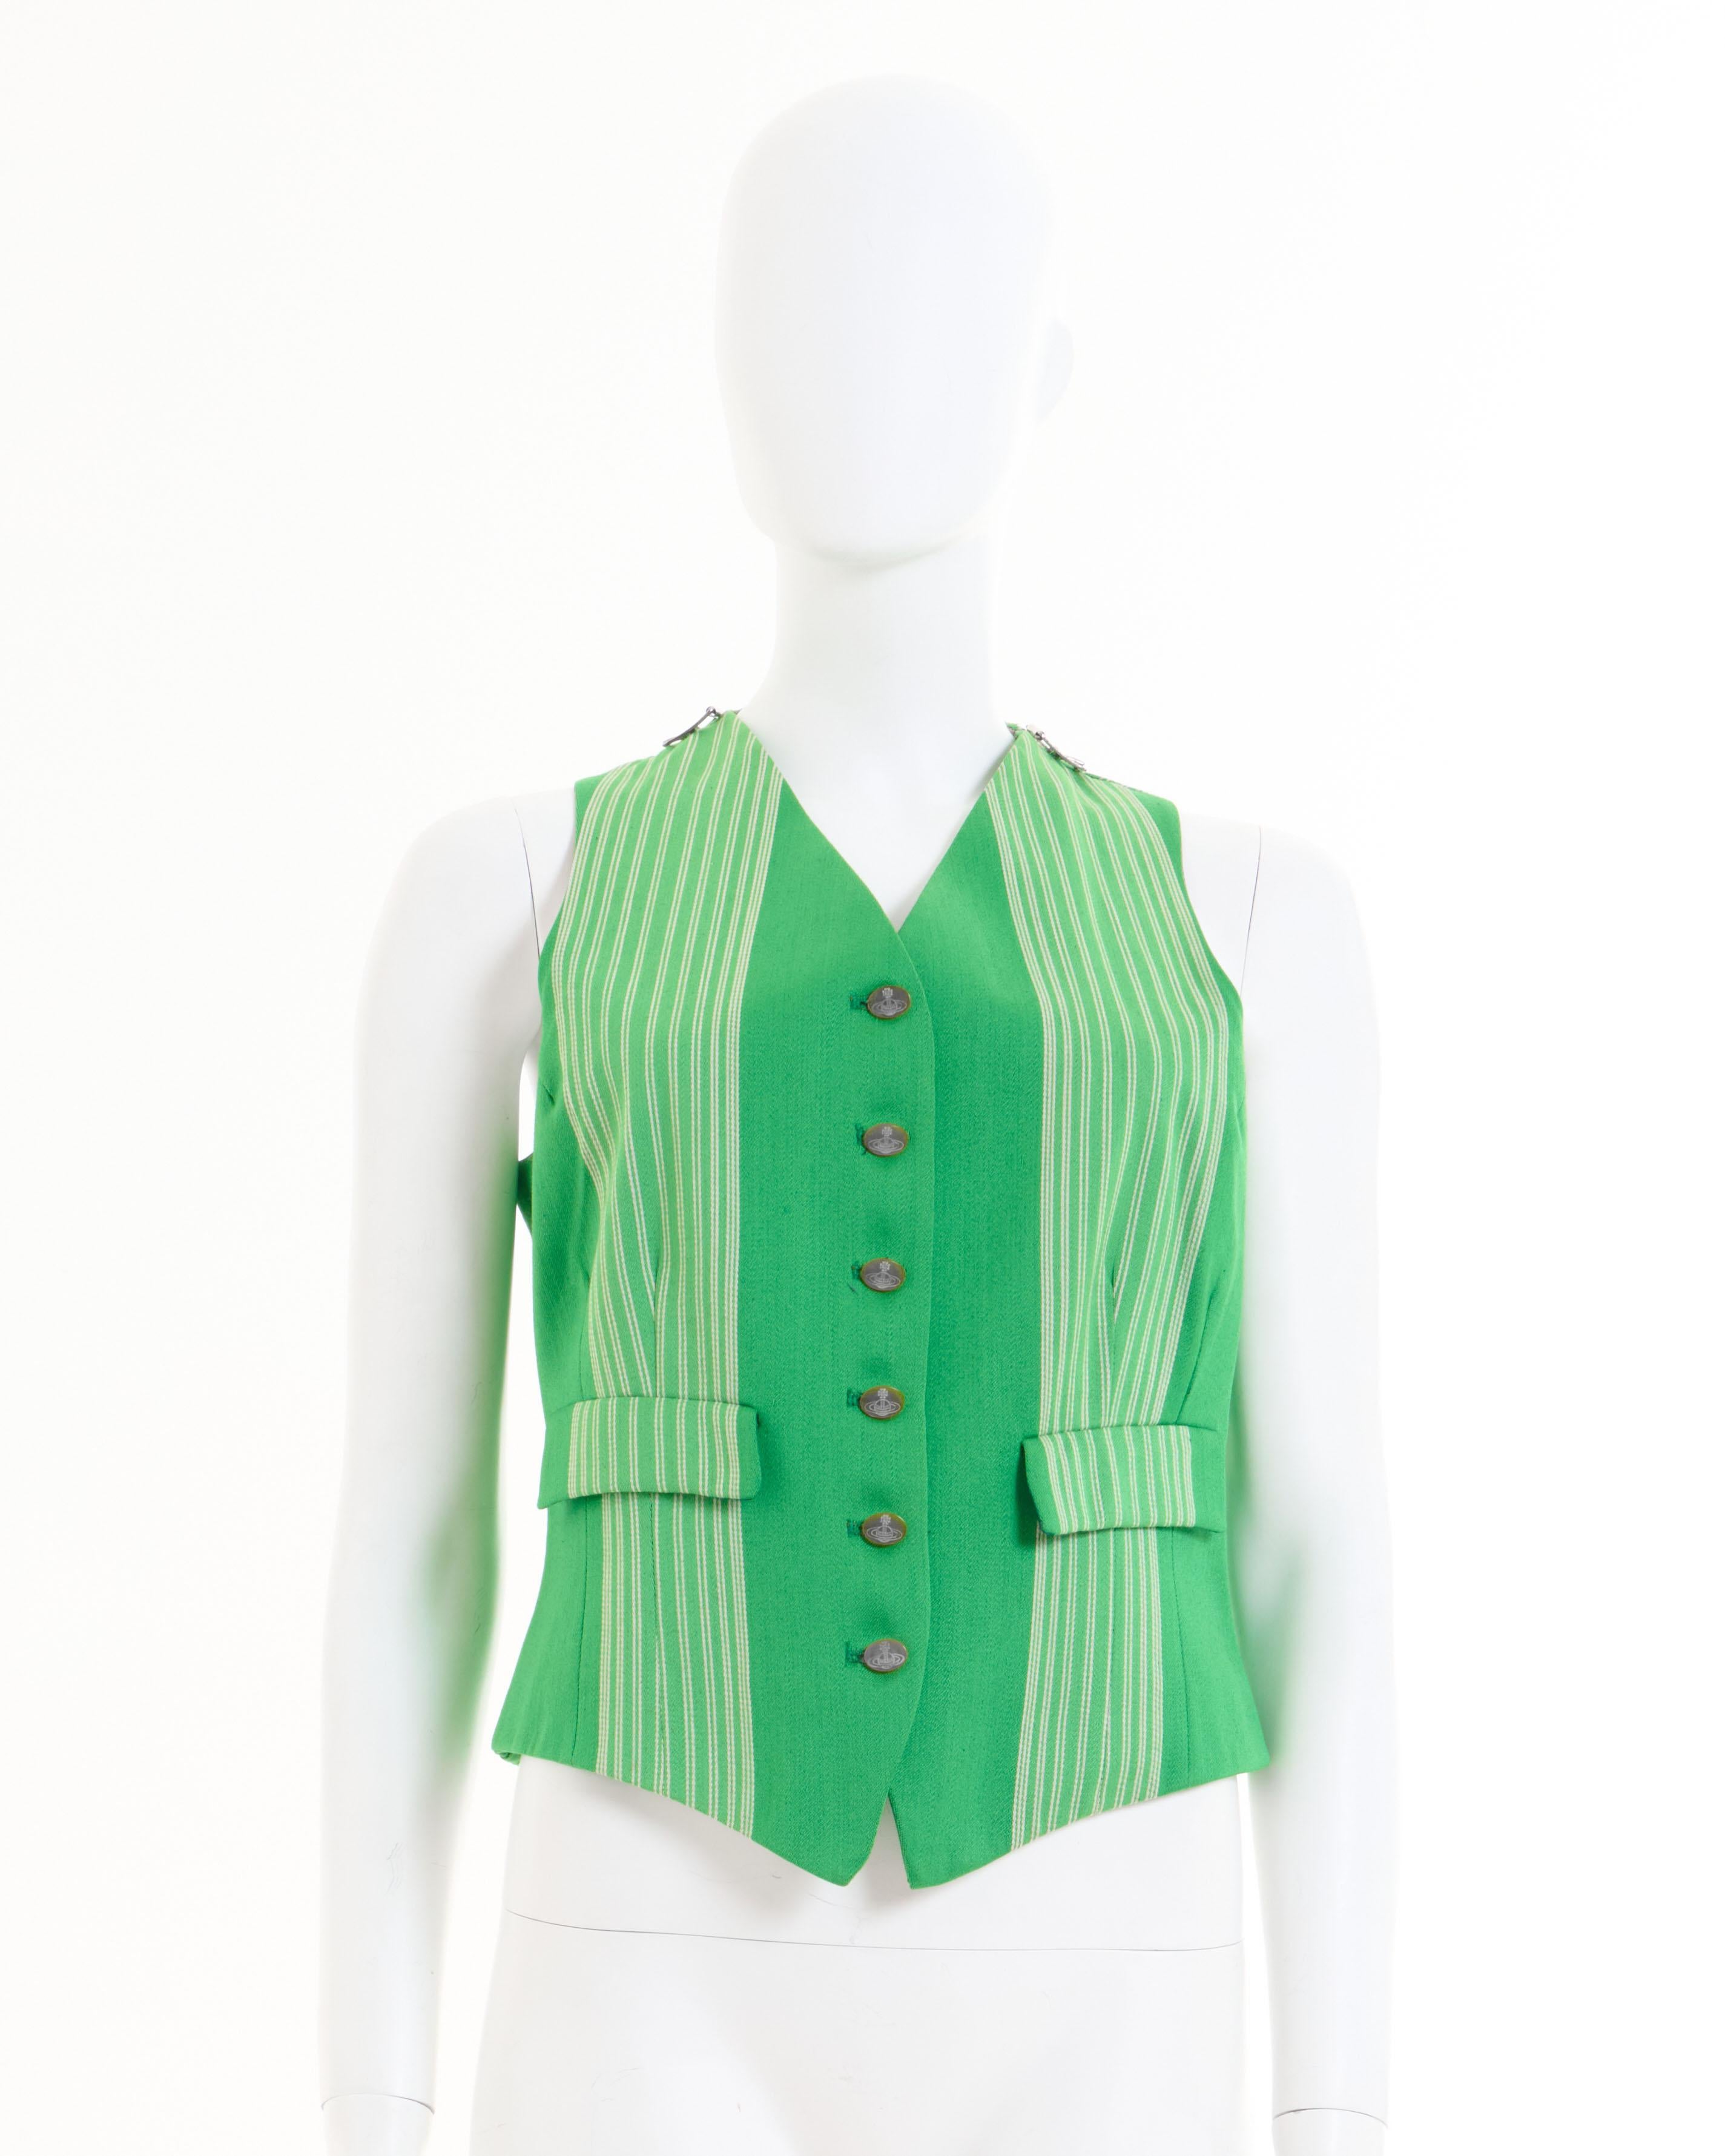 Vivienne Westwood  F/W 1988/89 ‘Time Machine’ Green striped Armour jacket For Sale 11